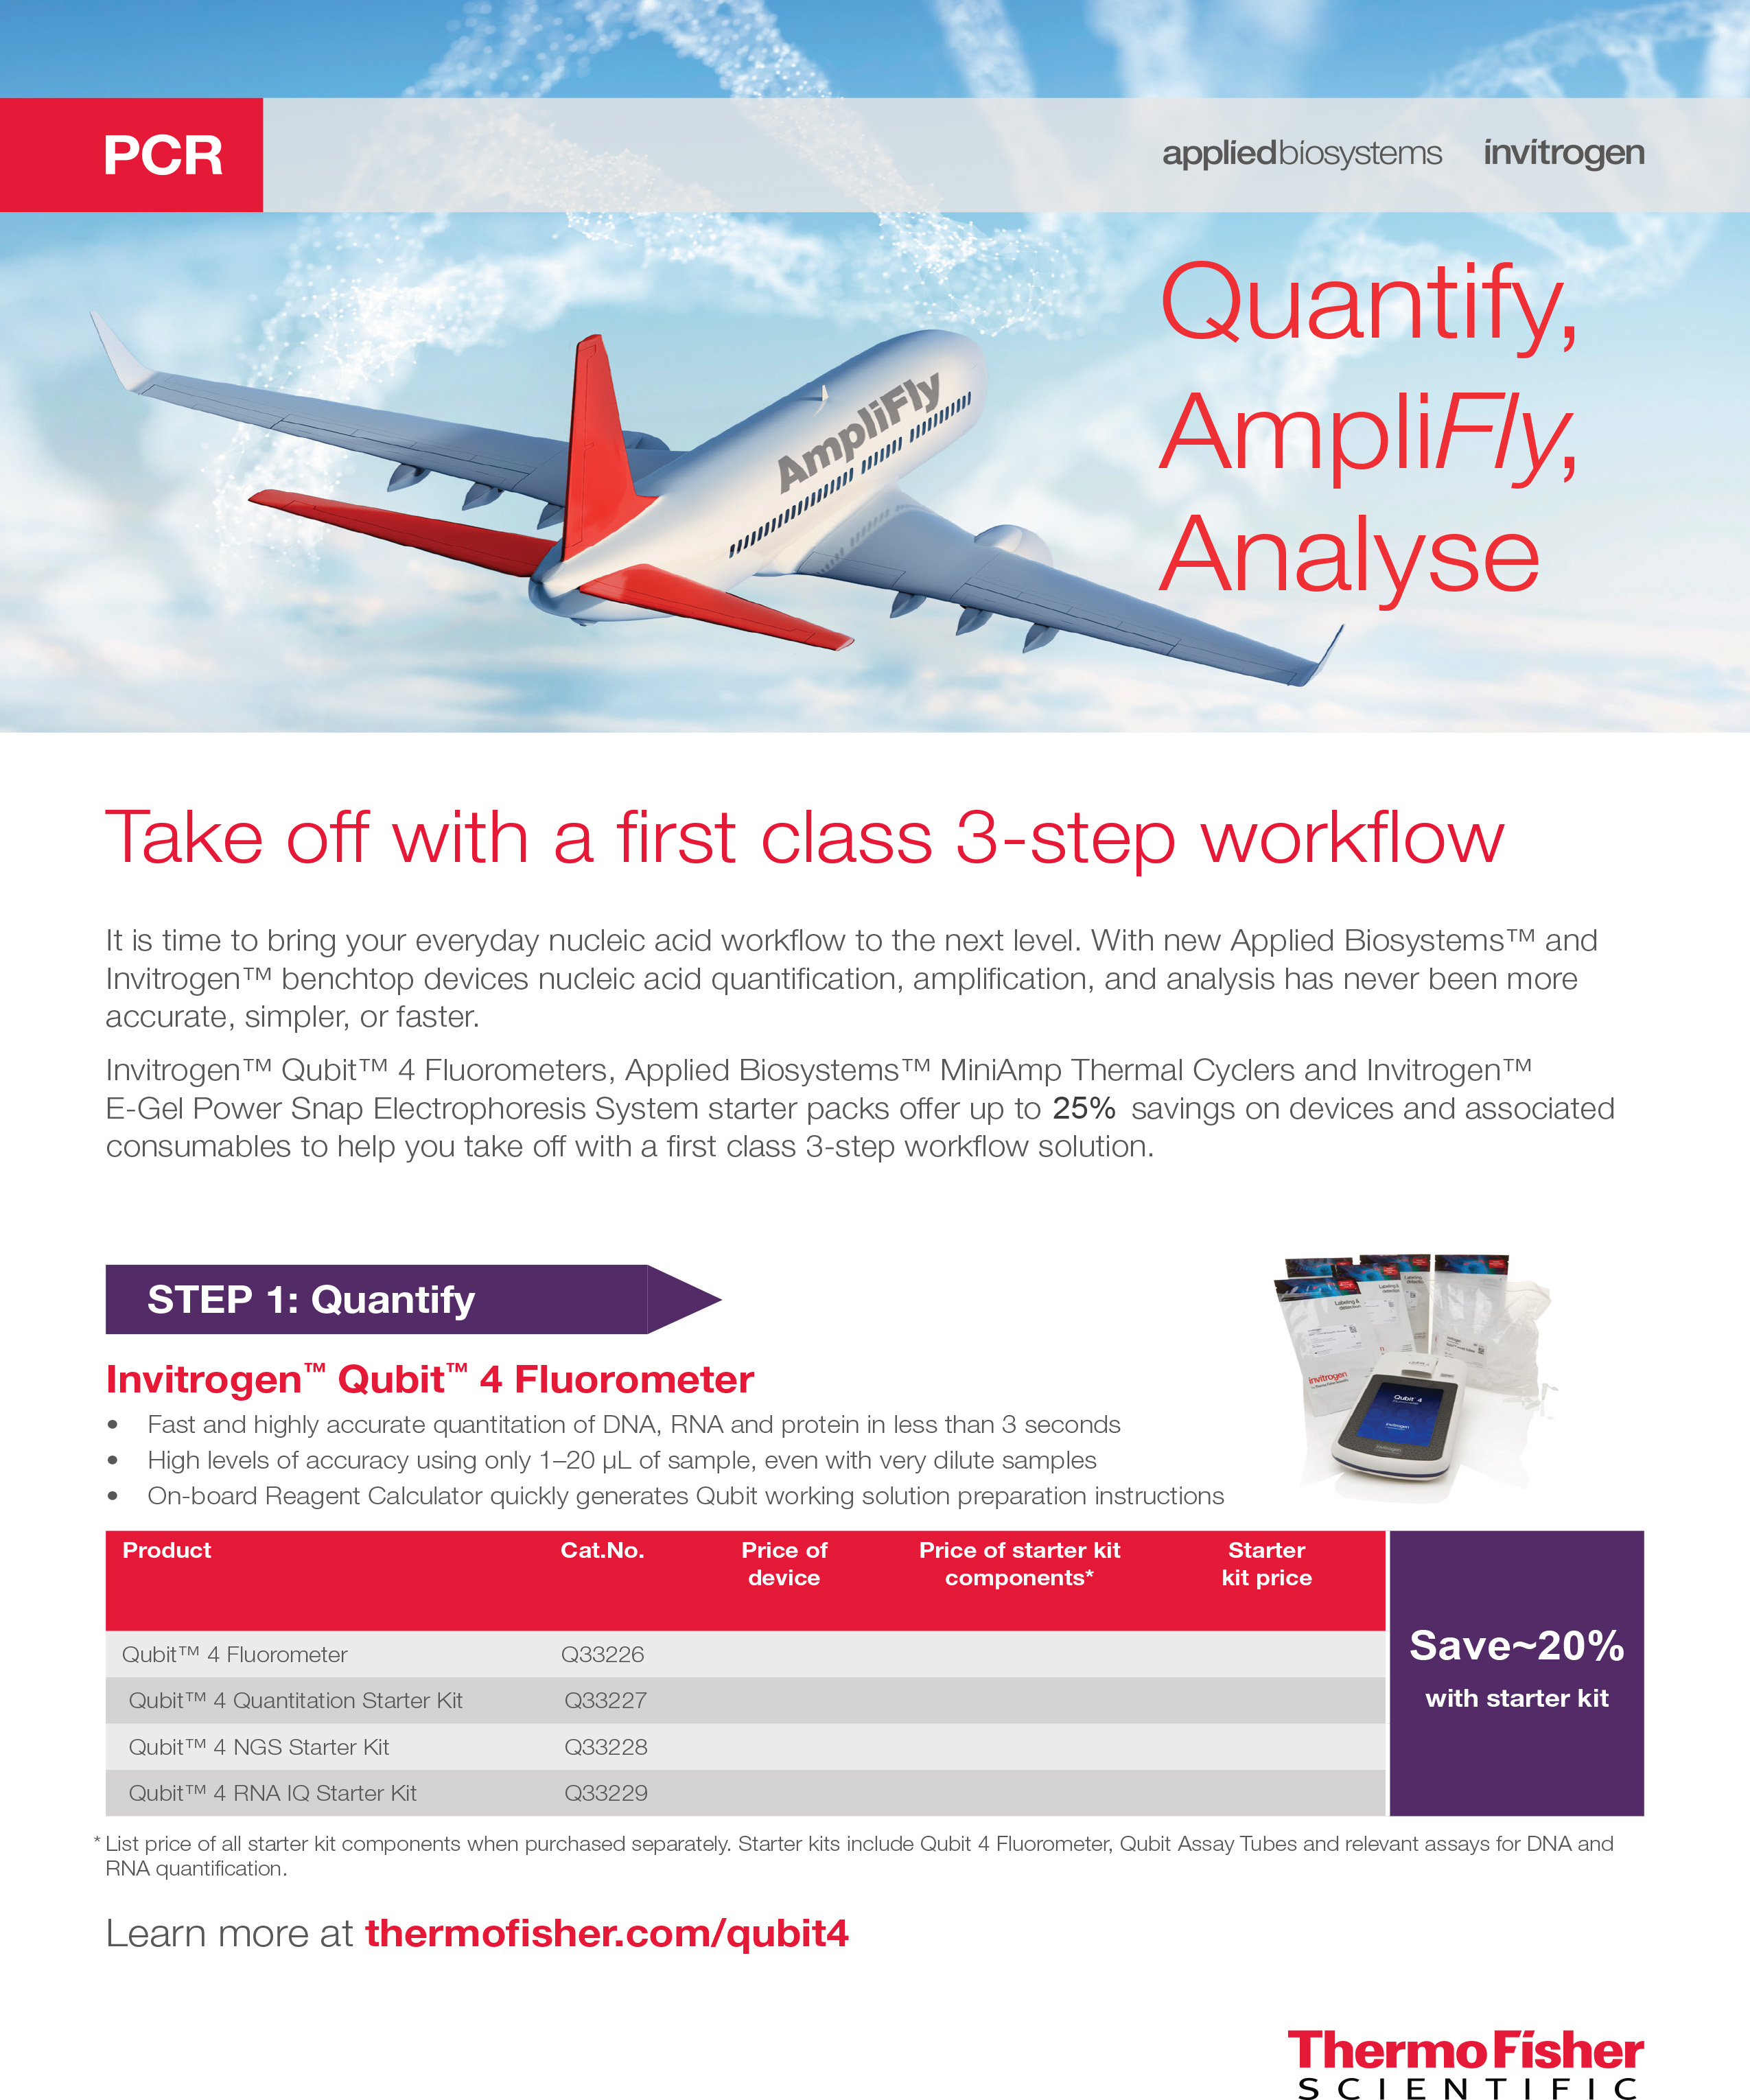 Take off with a first class 3-step workflow